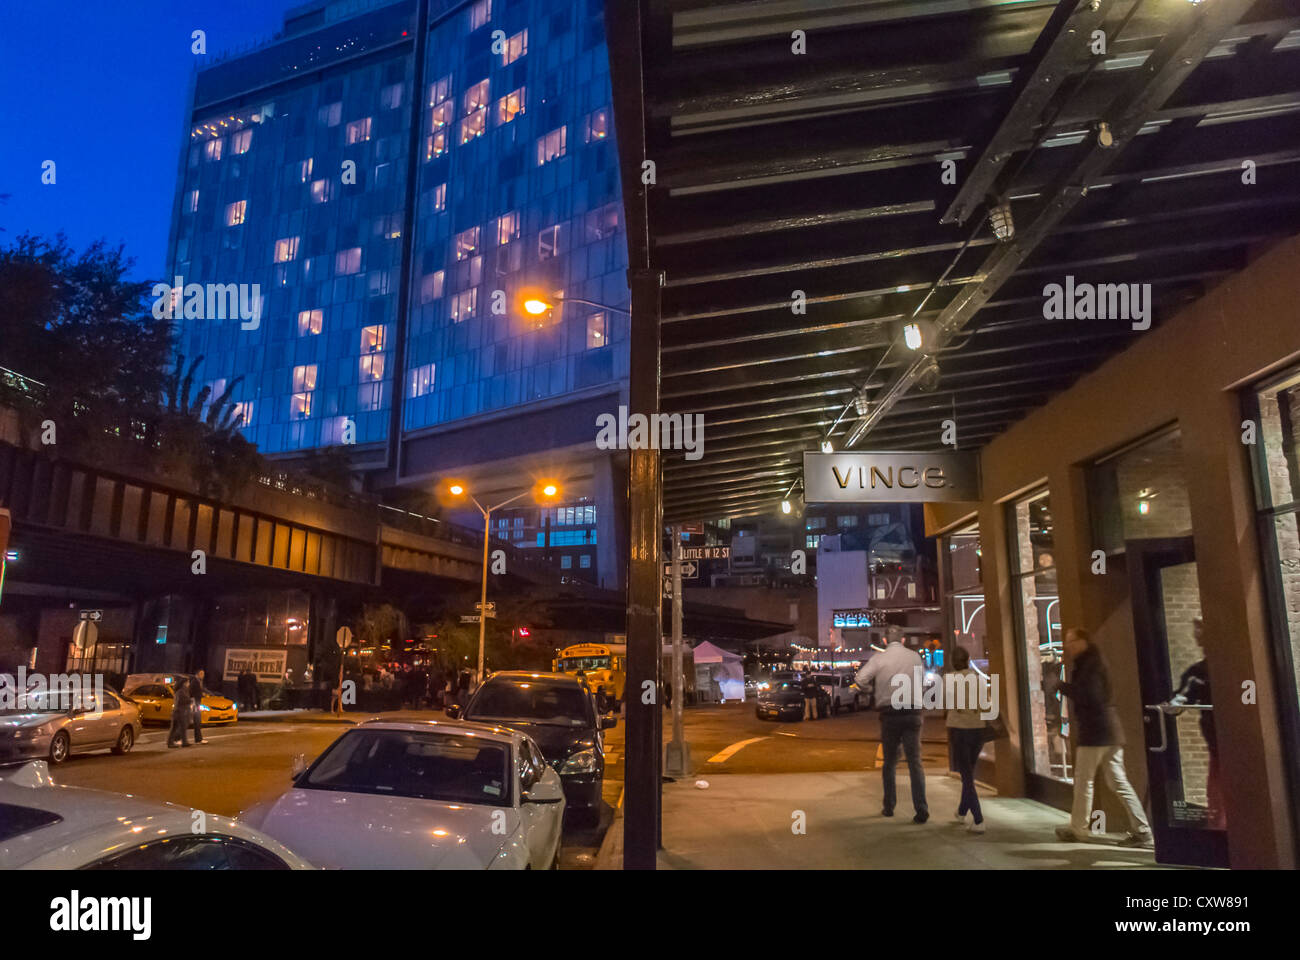 New York City, NY, USA, Street Scenes, Fashionable Stores at Night, in the Meatpacking District, Manhattan, Standard Hotel Building in Back, outdoor lights Stock Photo